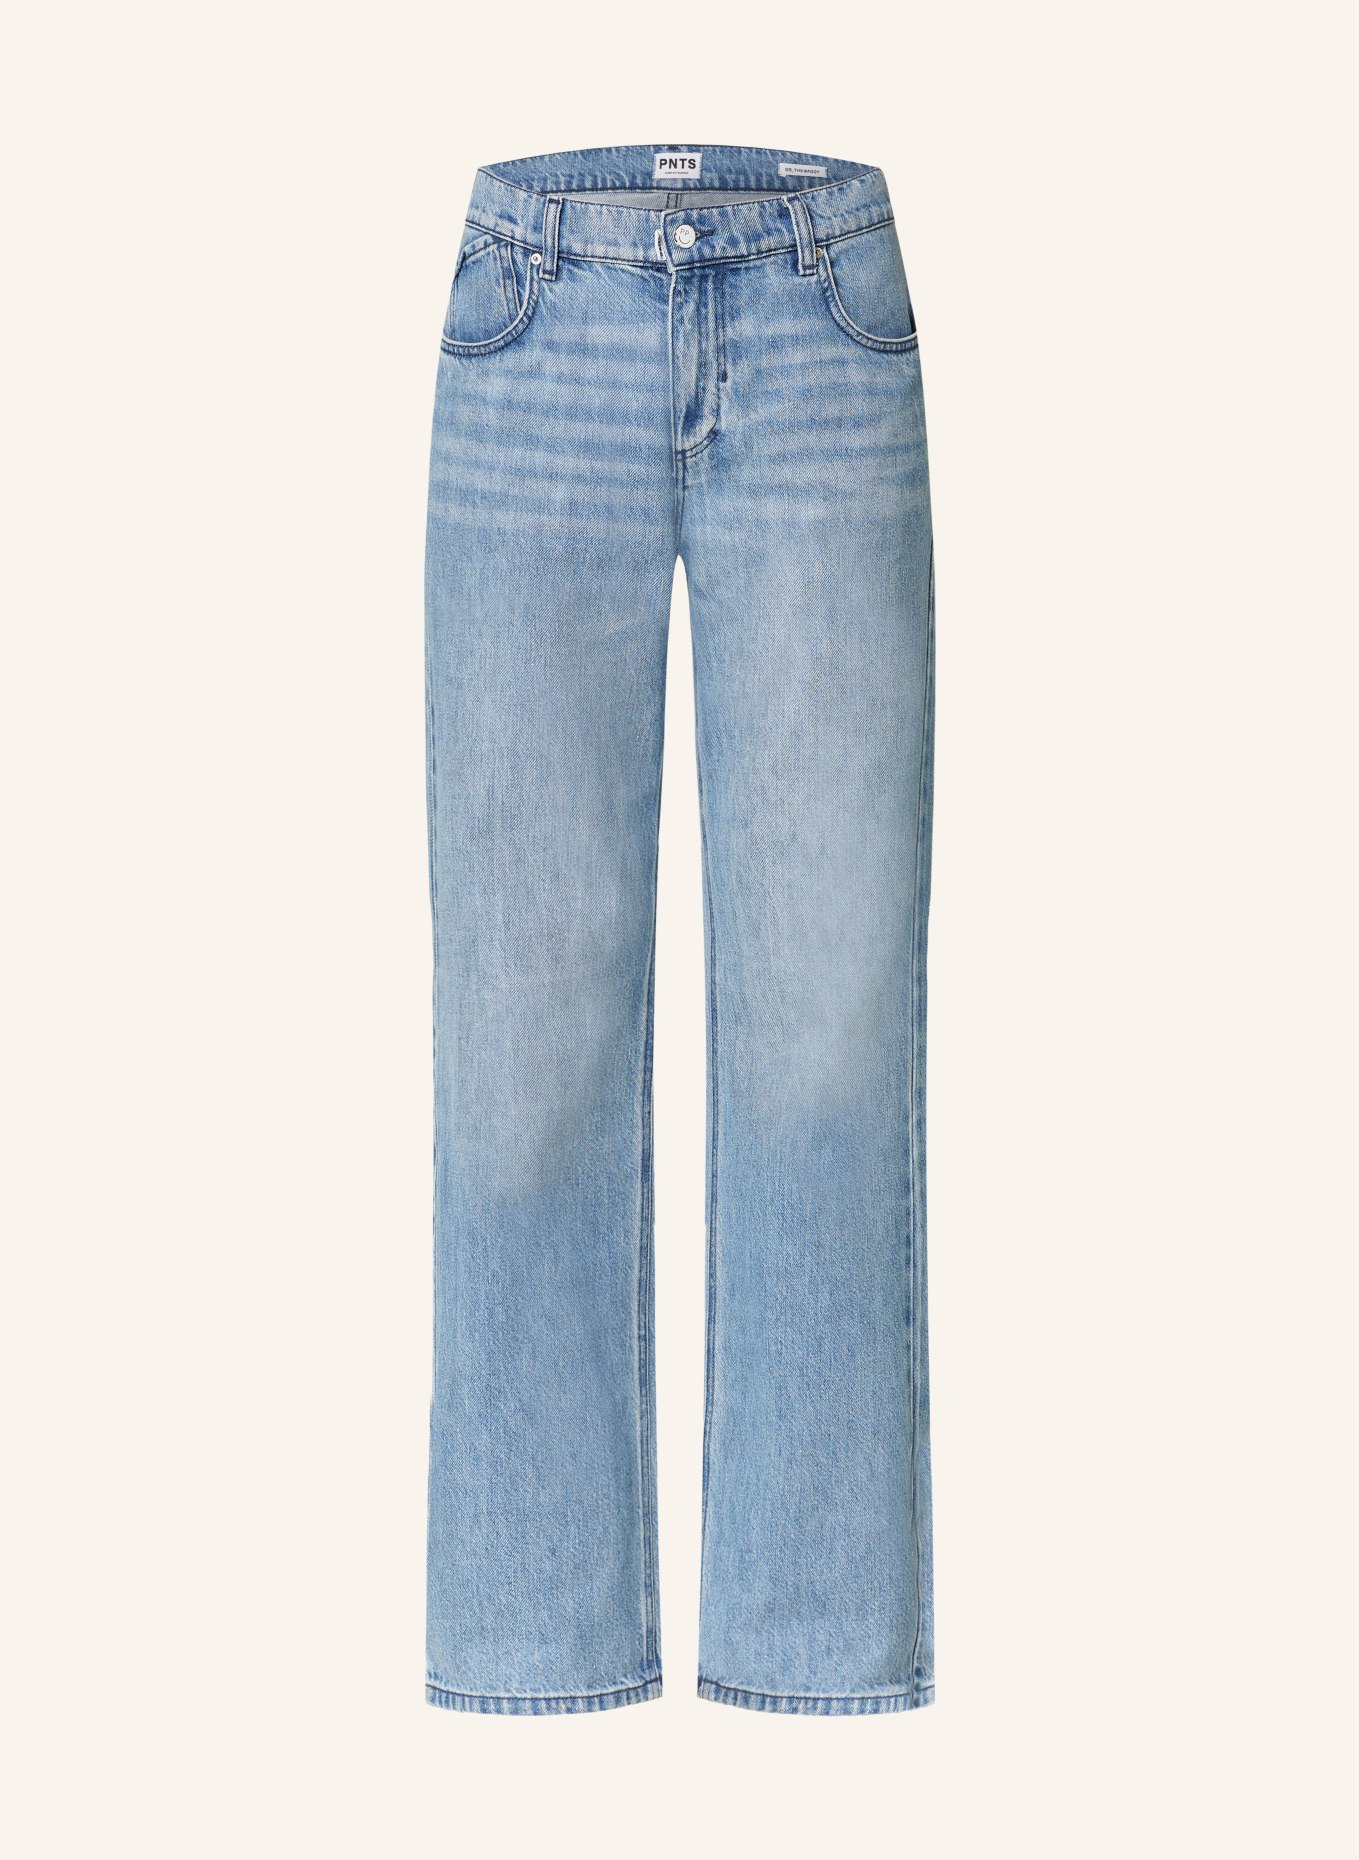 PNTS Straight Jeans THE BAGGY, Farbe: 29 BLEACHED INDIGO (Bild 1)